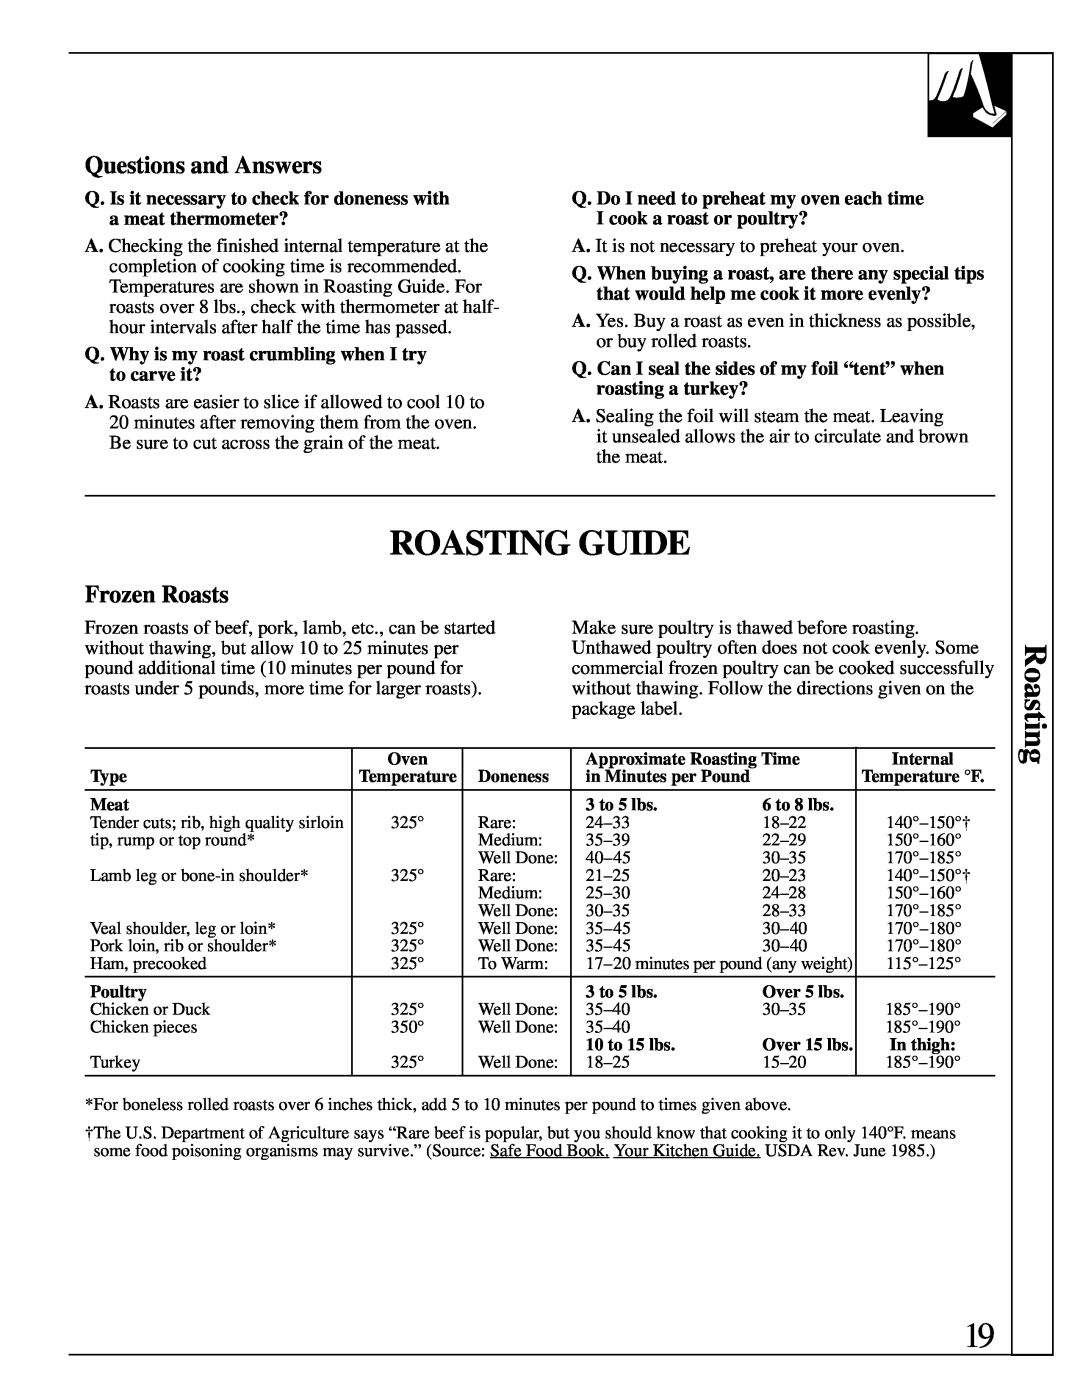 GE JMS10 warranty Roasting Guide, Frozen Roasts, Questions and Answers 